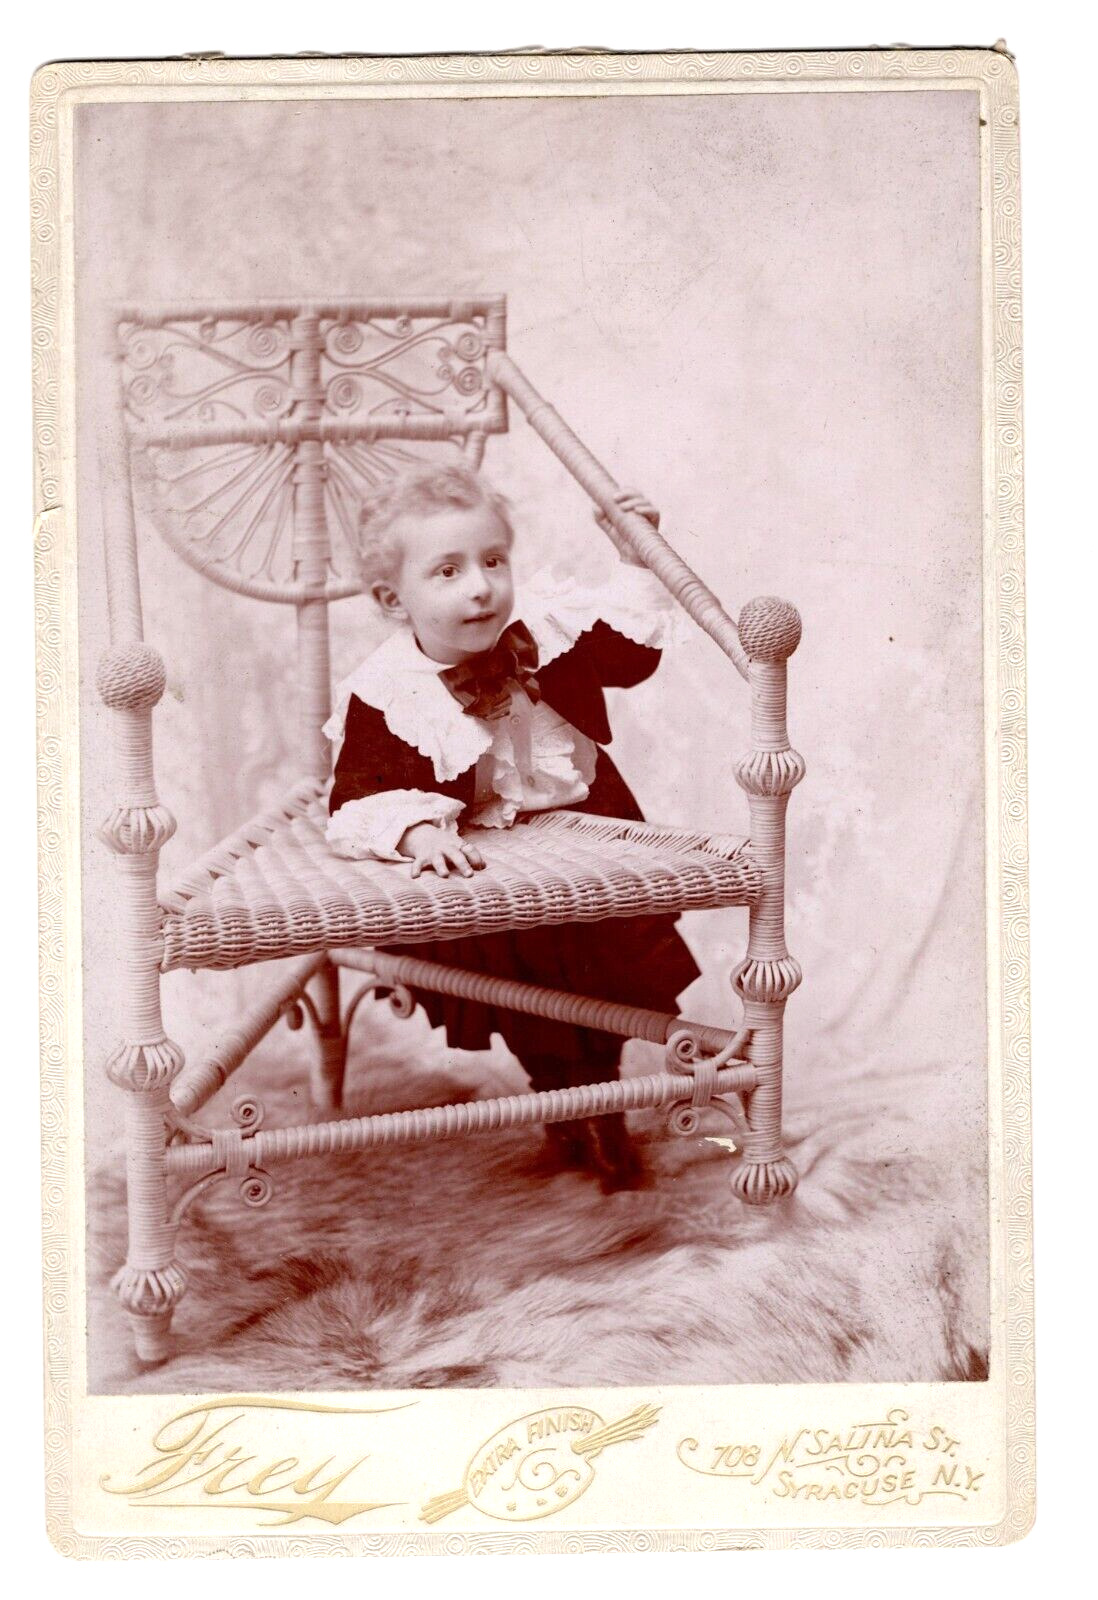 ADORABLE SMILING CHILD : FASHIONABLE : SYRACUSE, NEW YORK : CABINET CARD